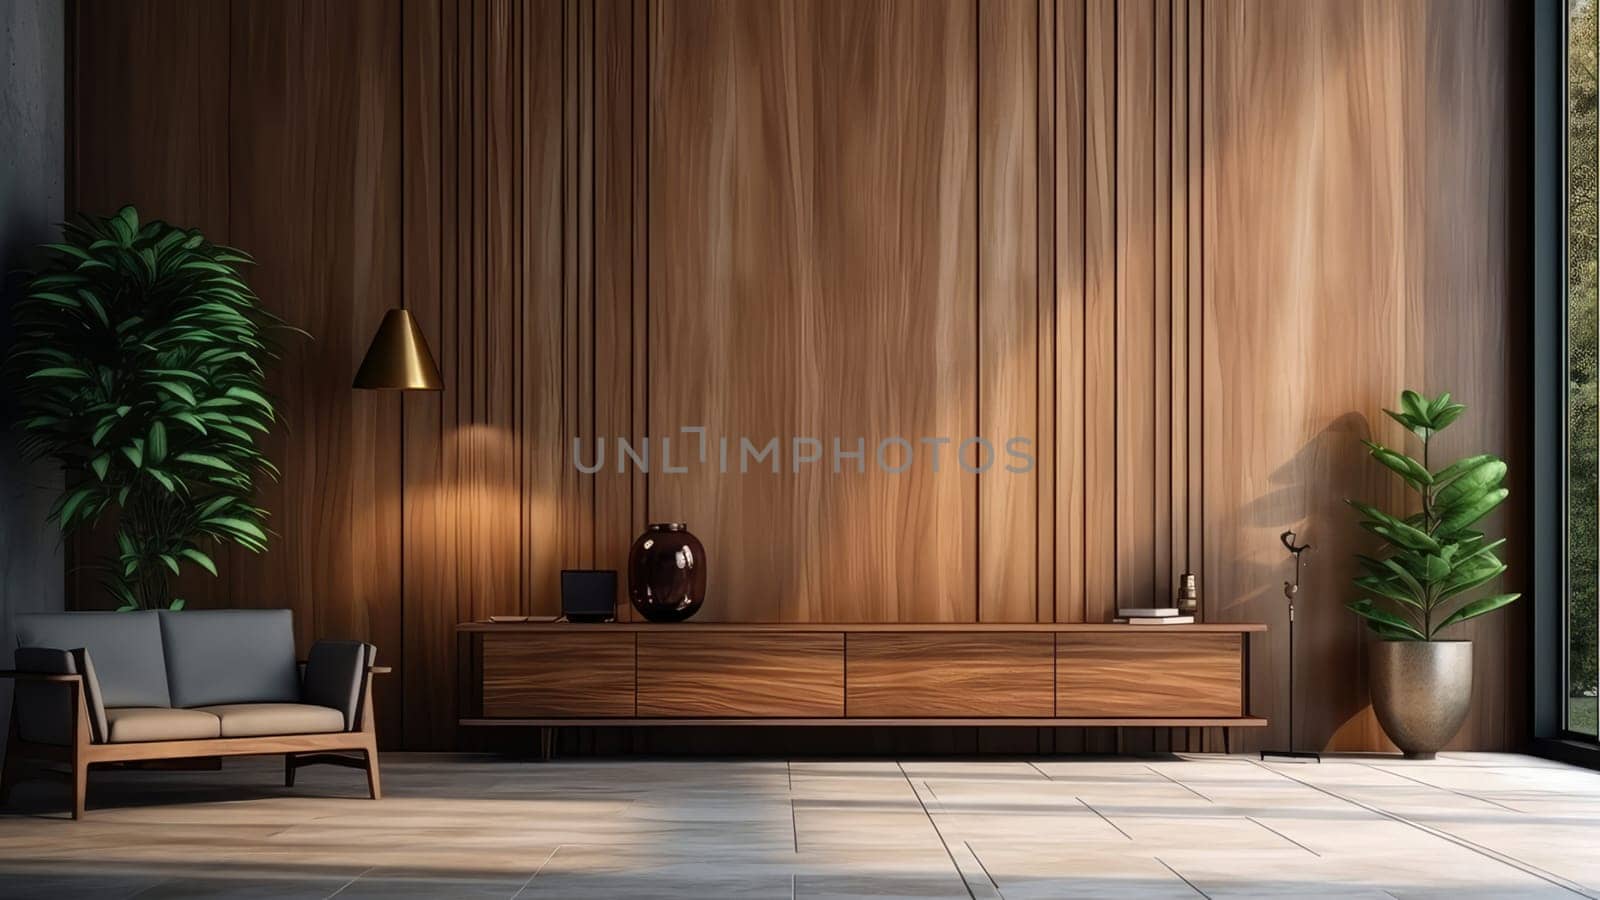 3D rendering of a minimalist living room. The room is decorated in a warm and inviting style.